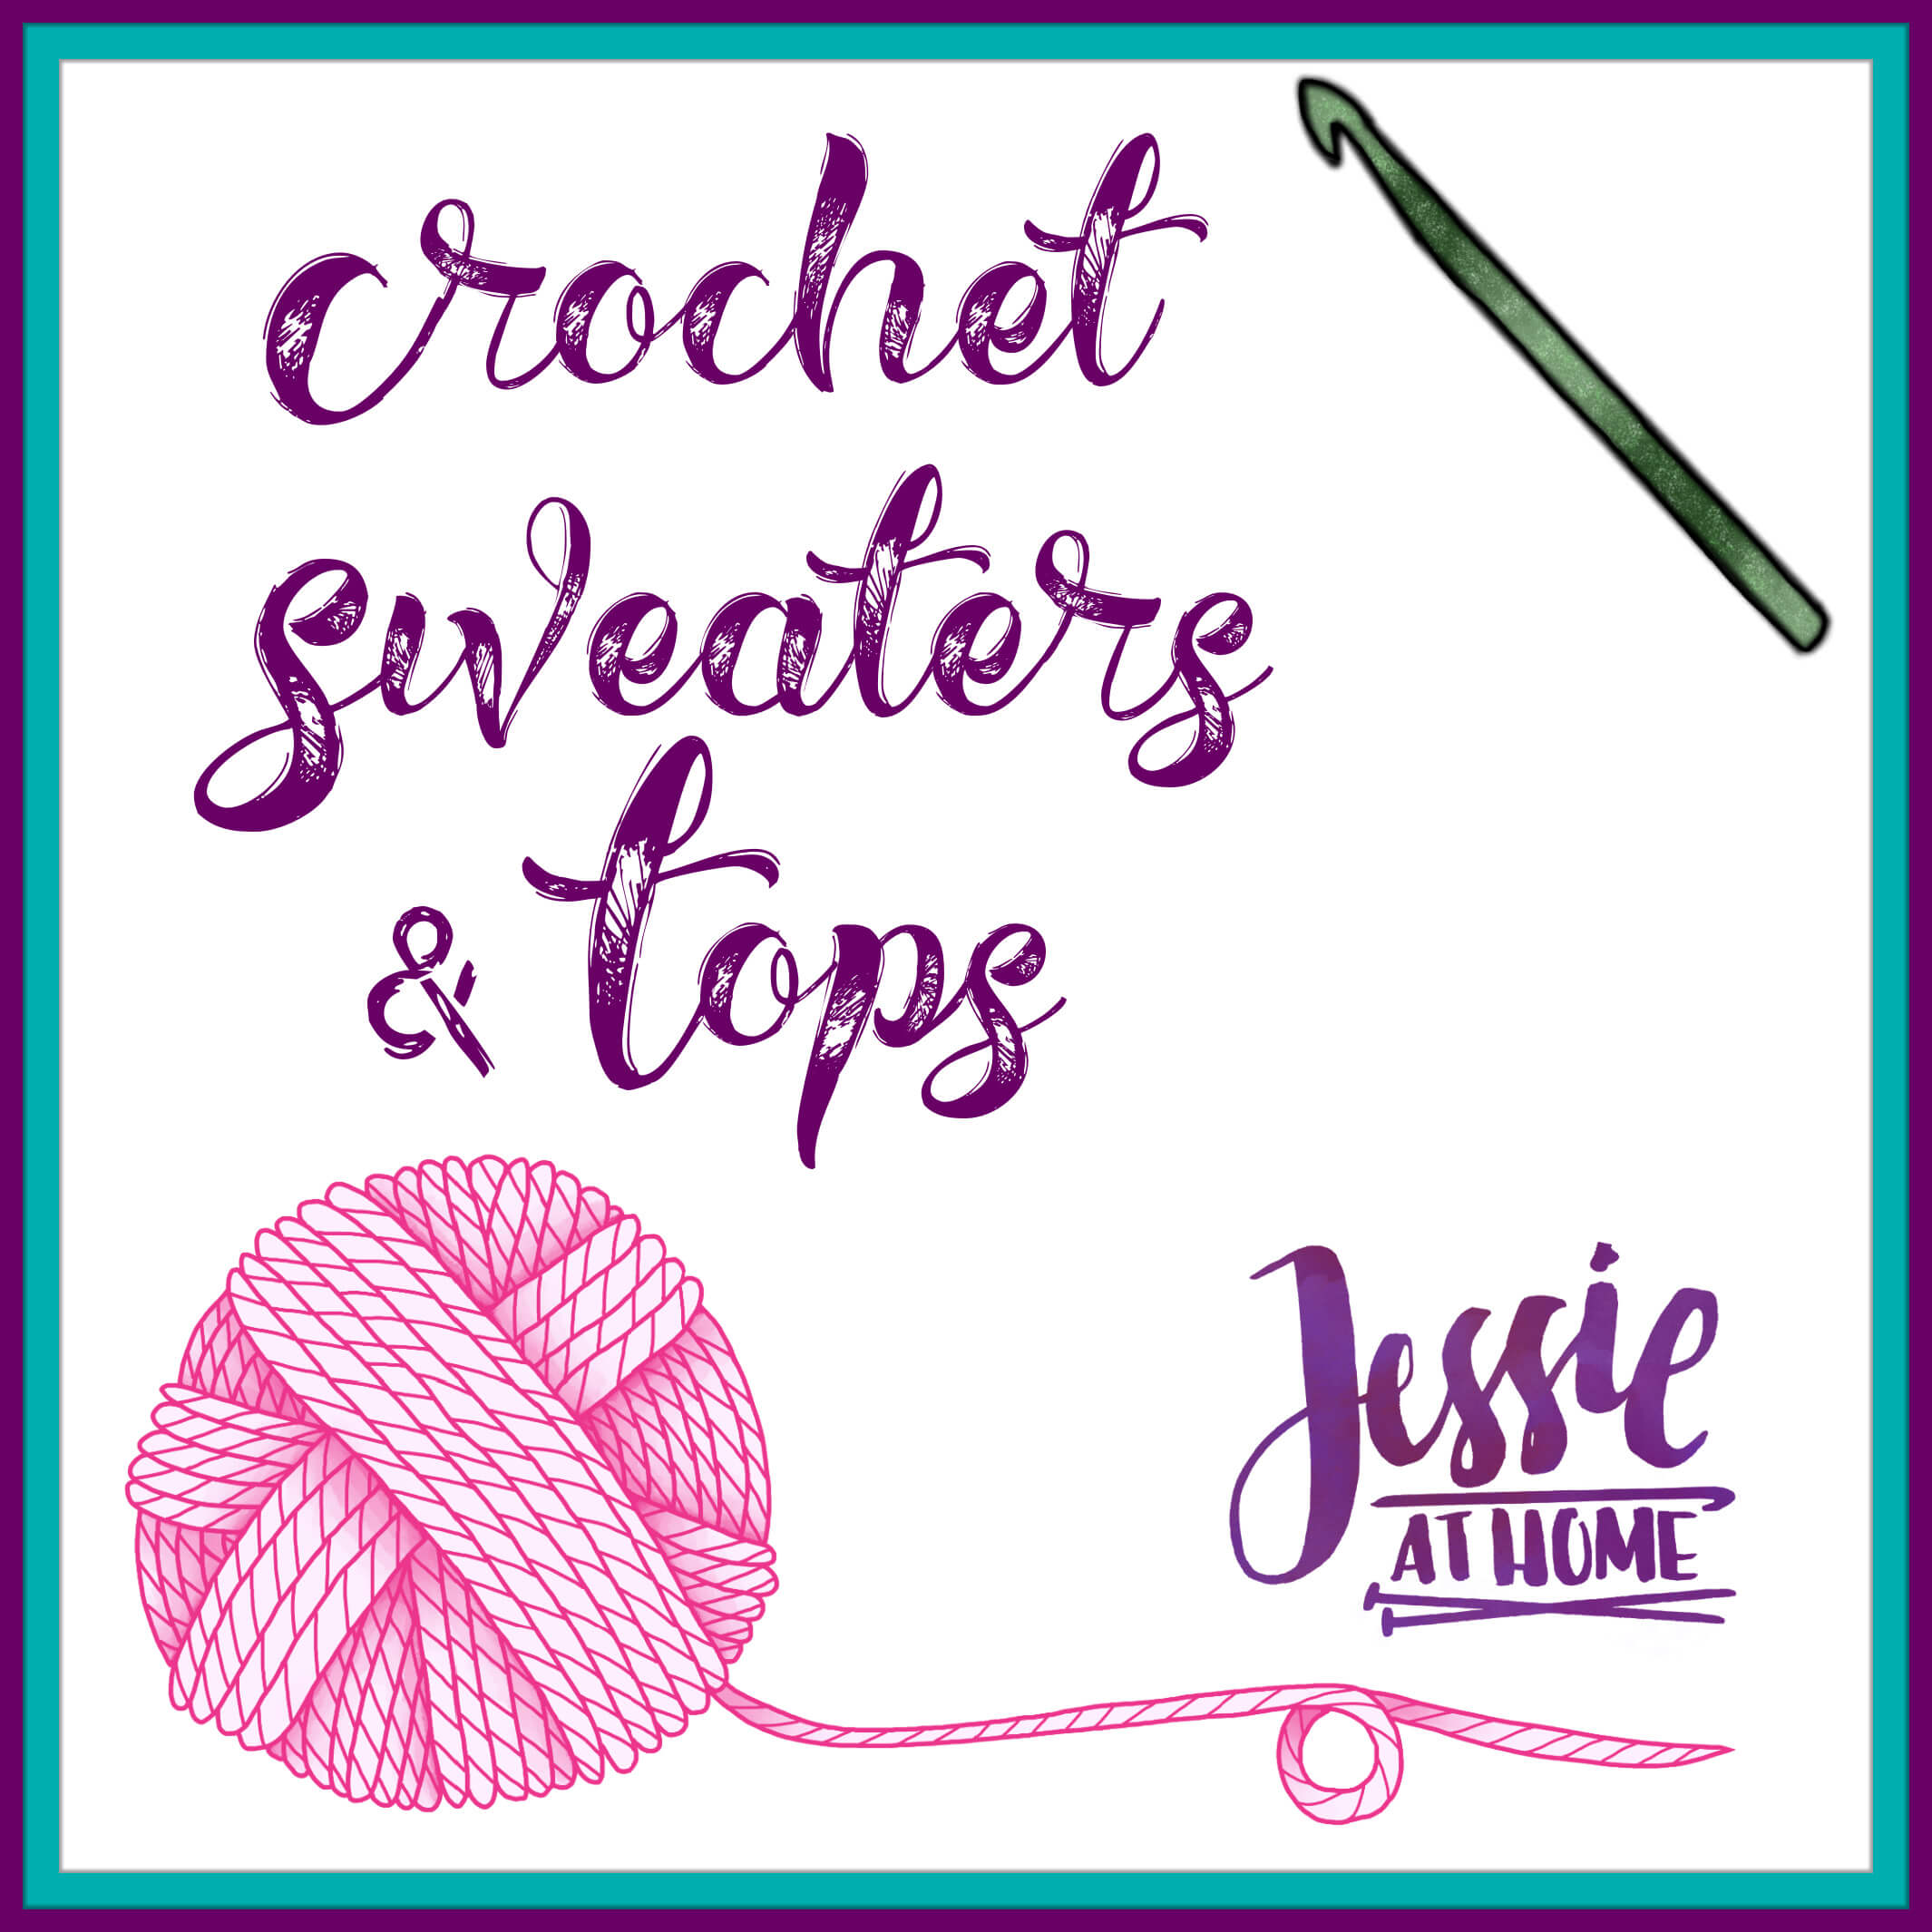 Crochet Sweaters & Tops Menu on Jessie At Home